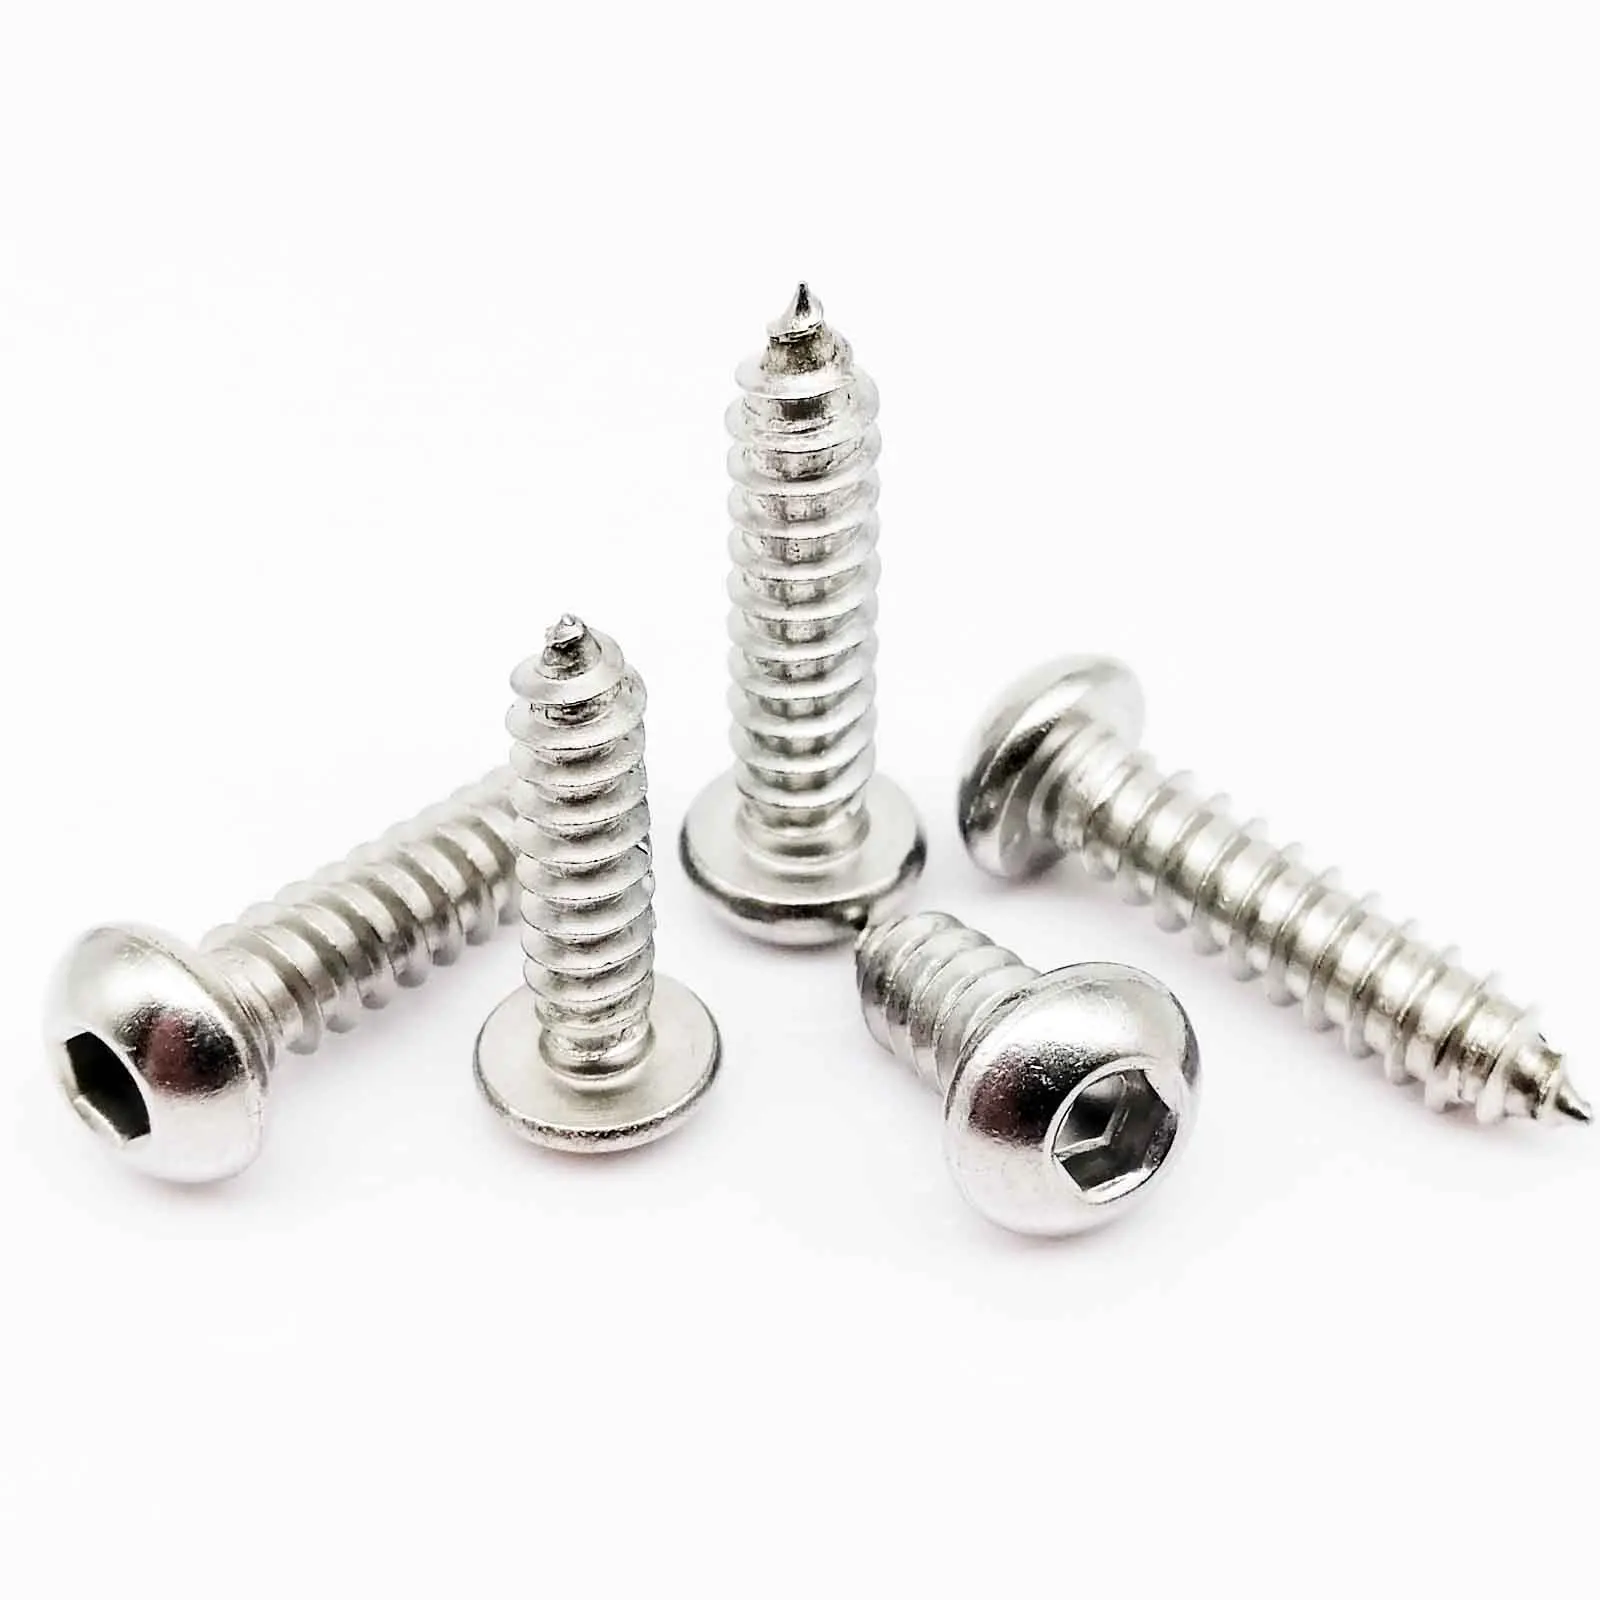 Cup Head Screw Hex Drive A2 Stainless Self Tapping Screws M2 2.5 3 3.5 4 5 6 